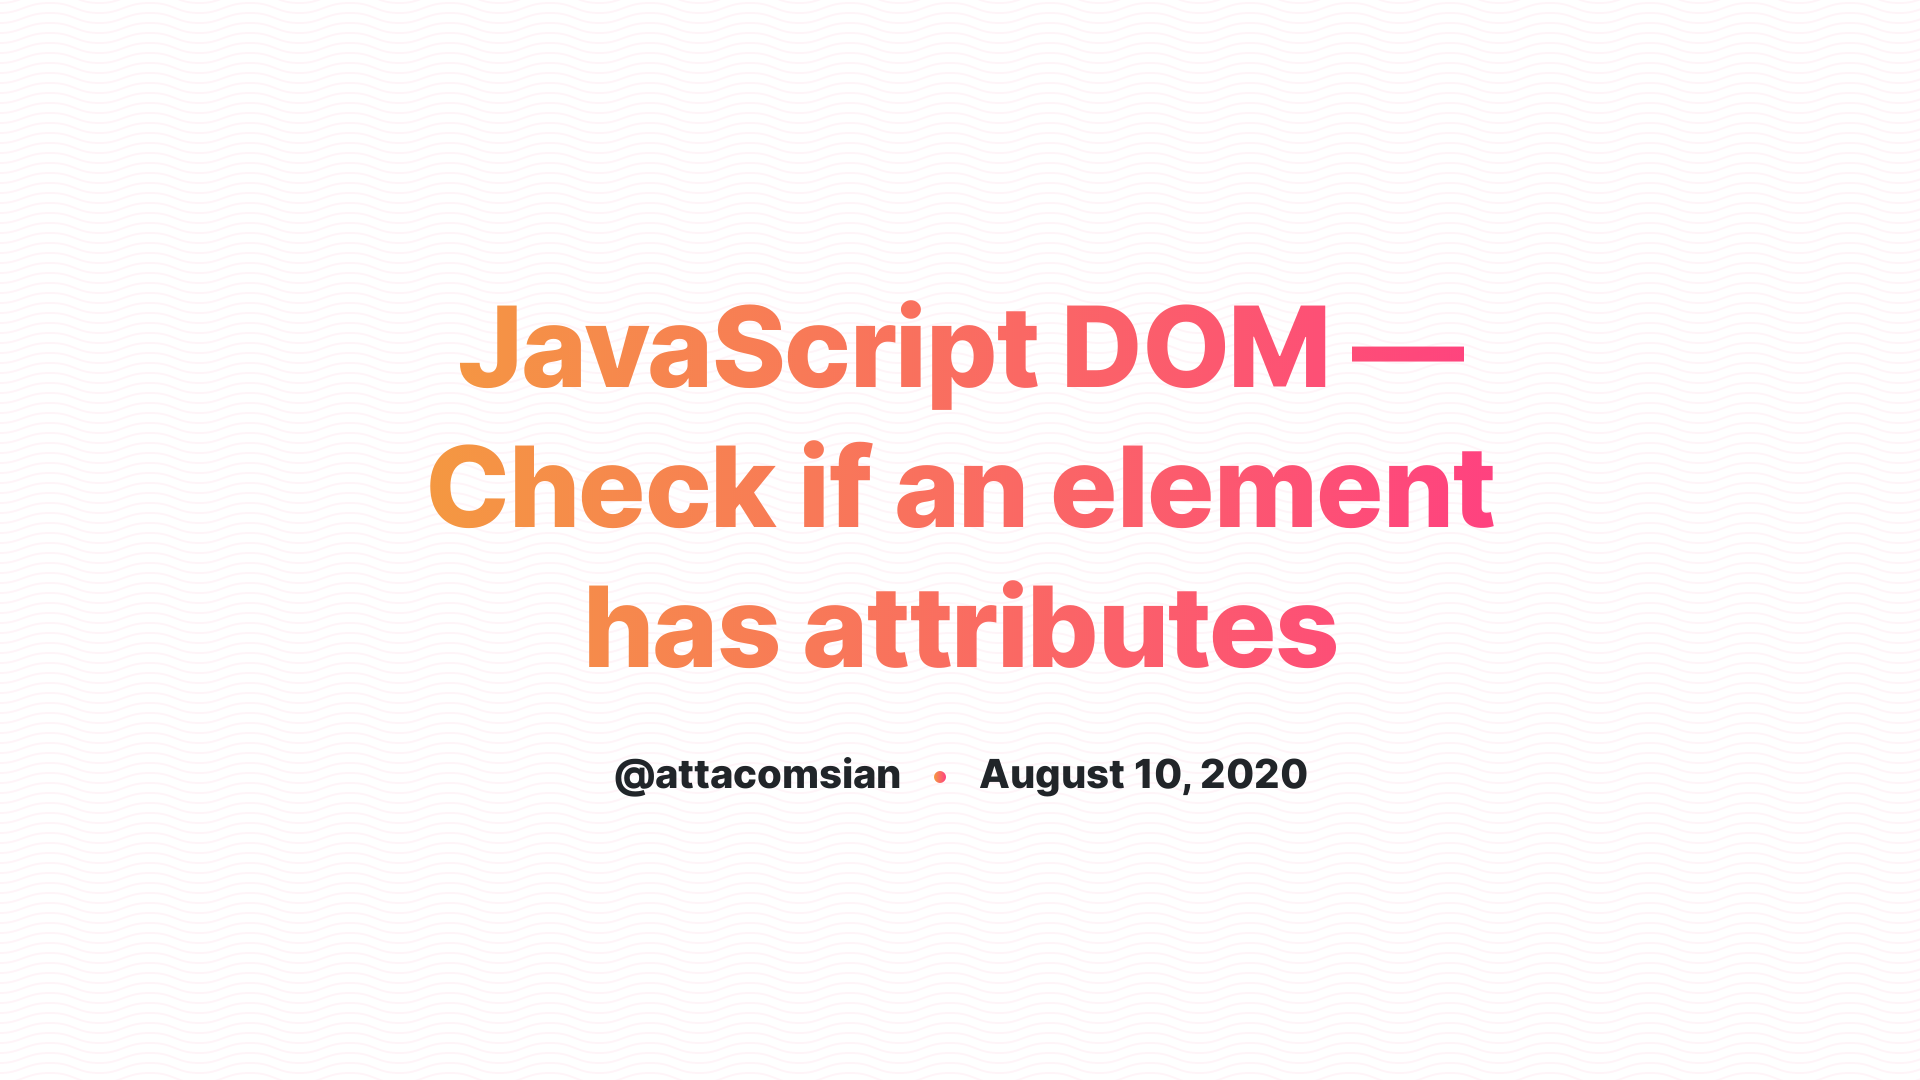 How to check if an element has attributes using JavaScript